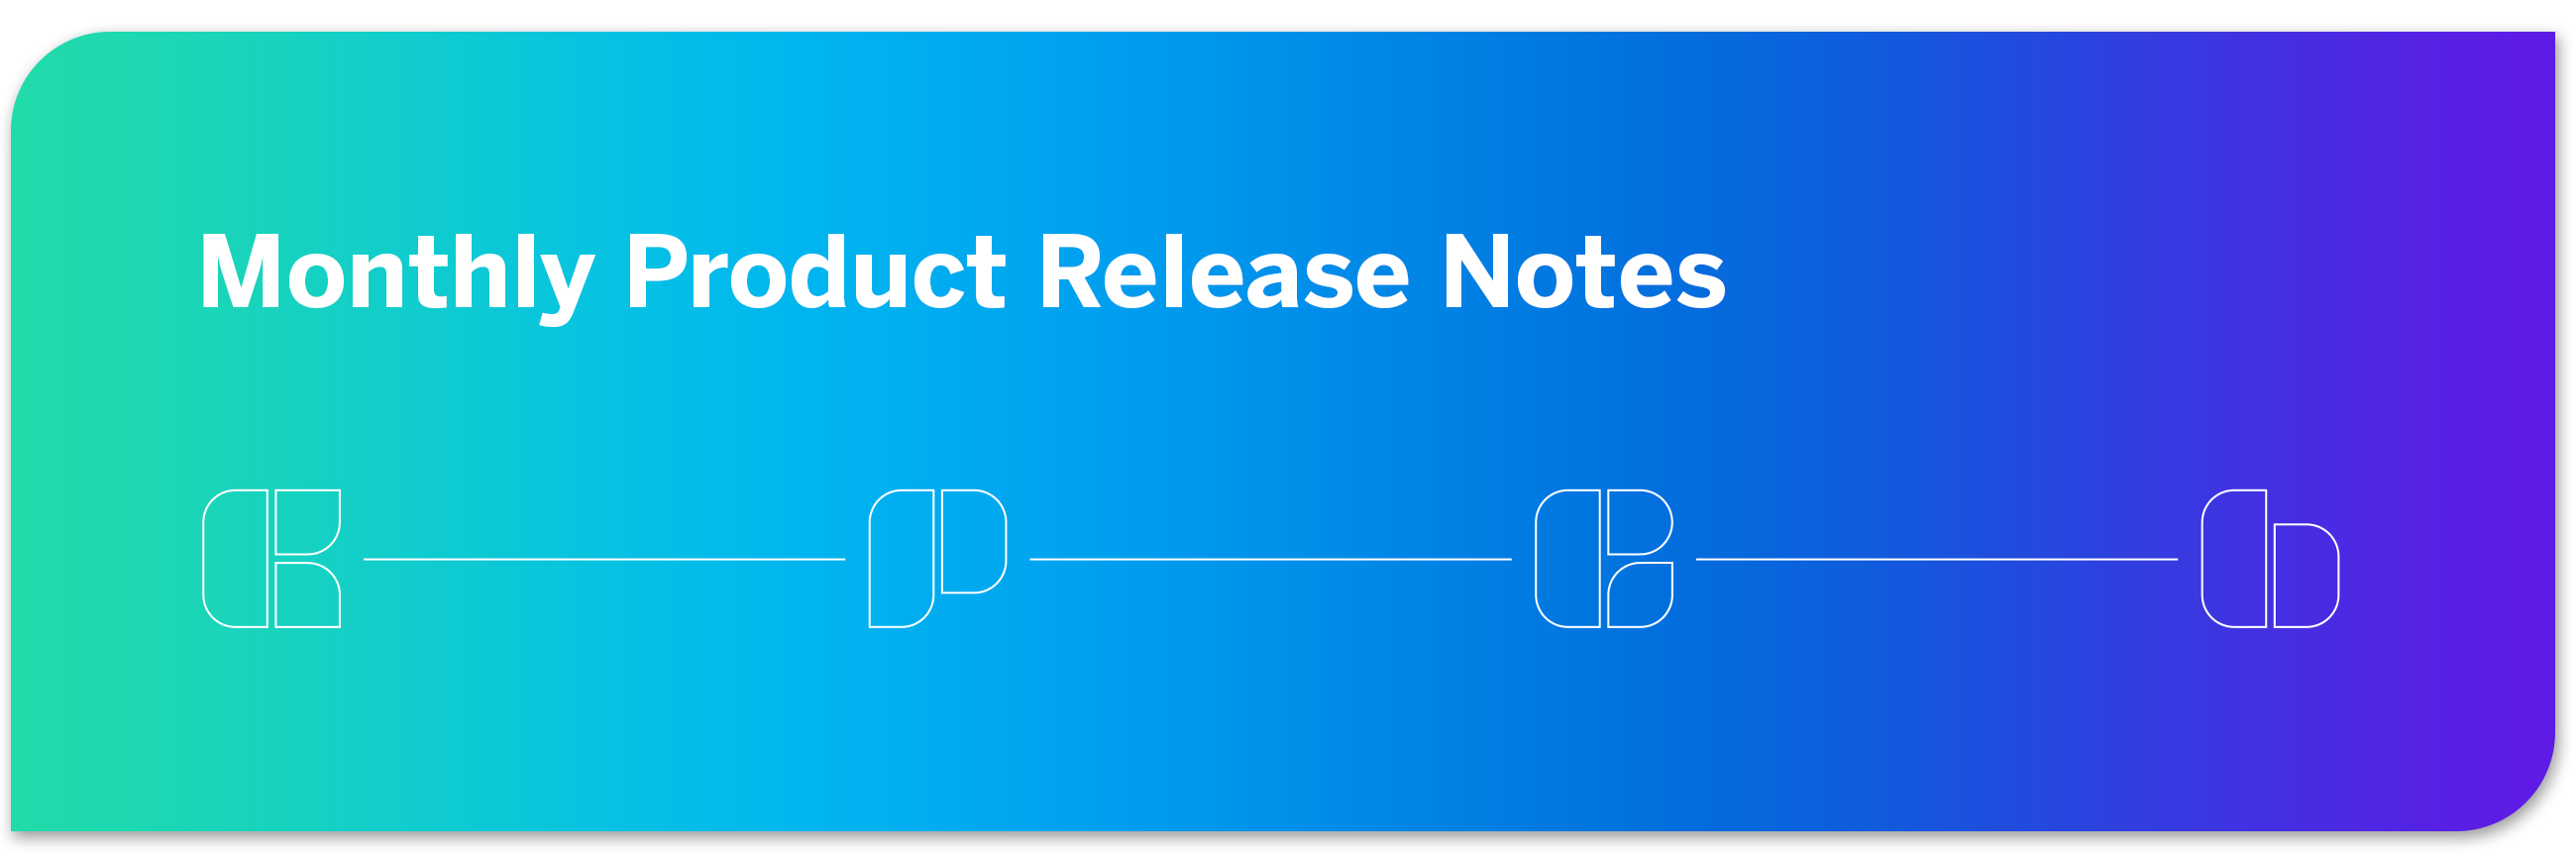 Monthly Product Release Notes banner